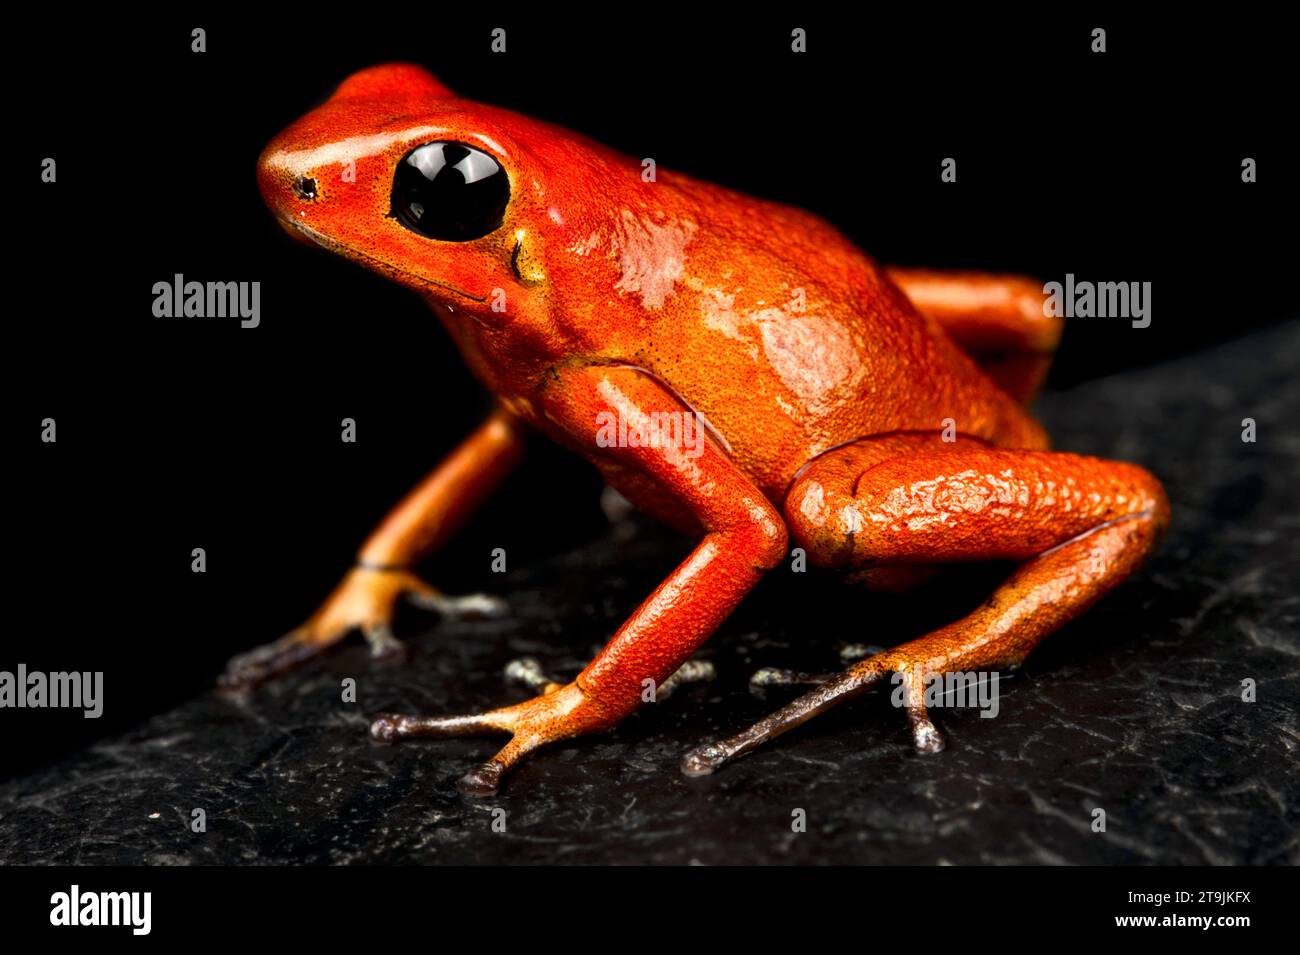 The Strawberry dart frog (Oophaga pumilio) is a highly variable colored amphibian species . This is a Panamanian specimen. Stock Photo